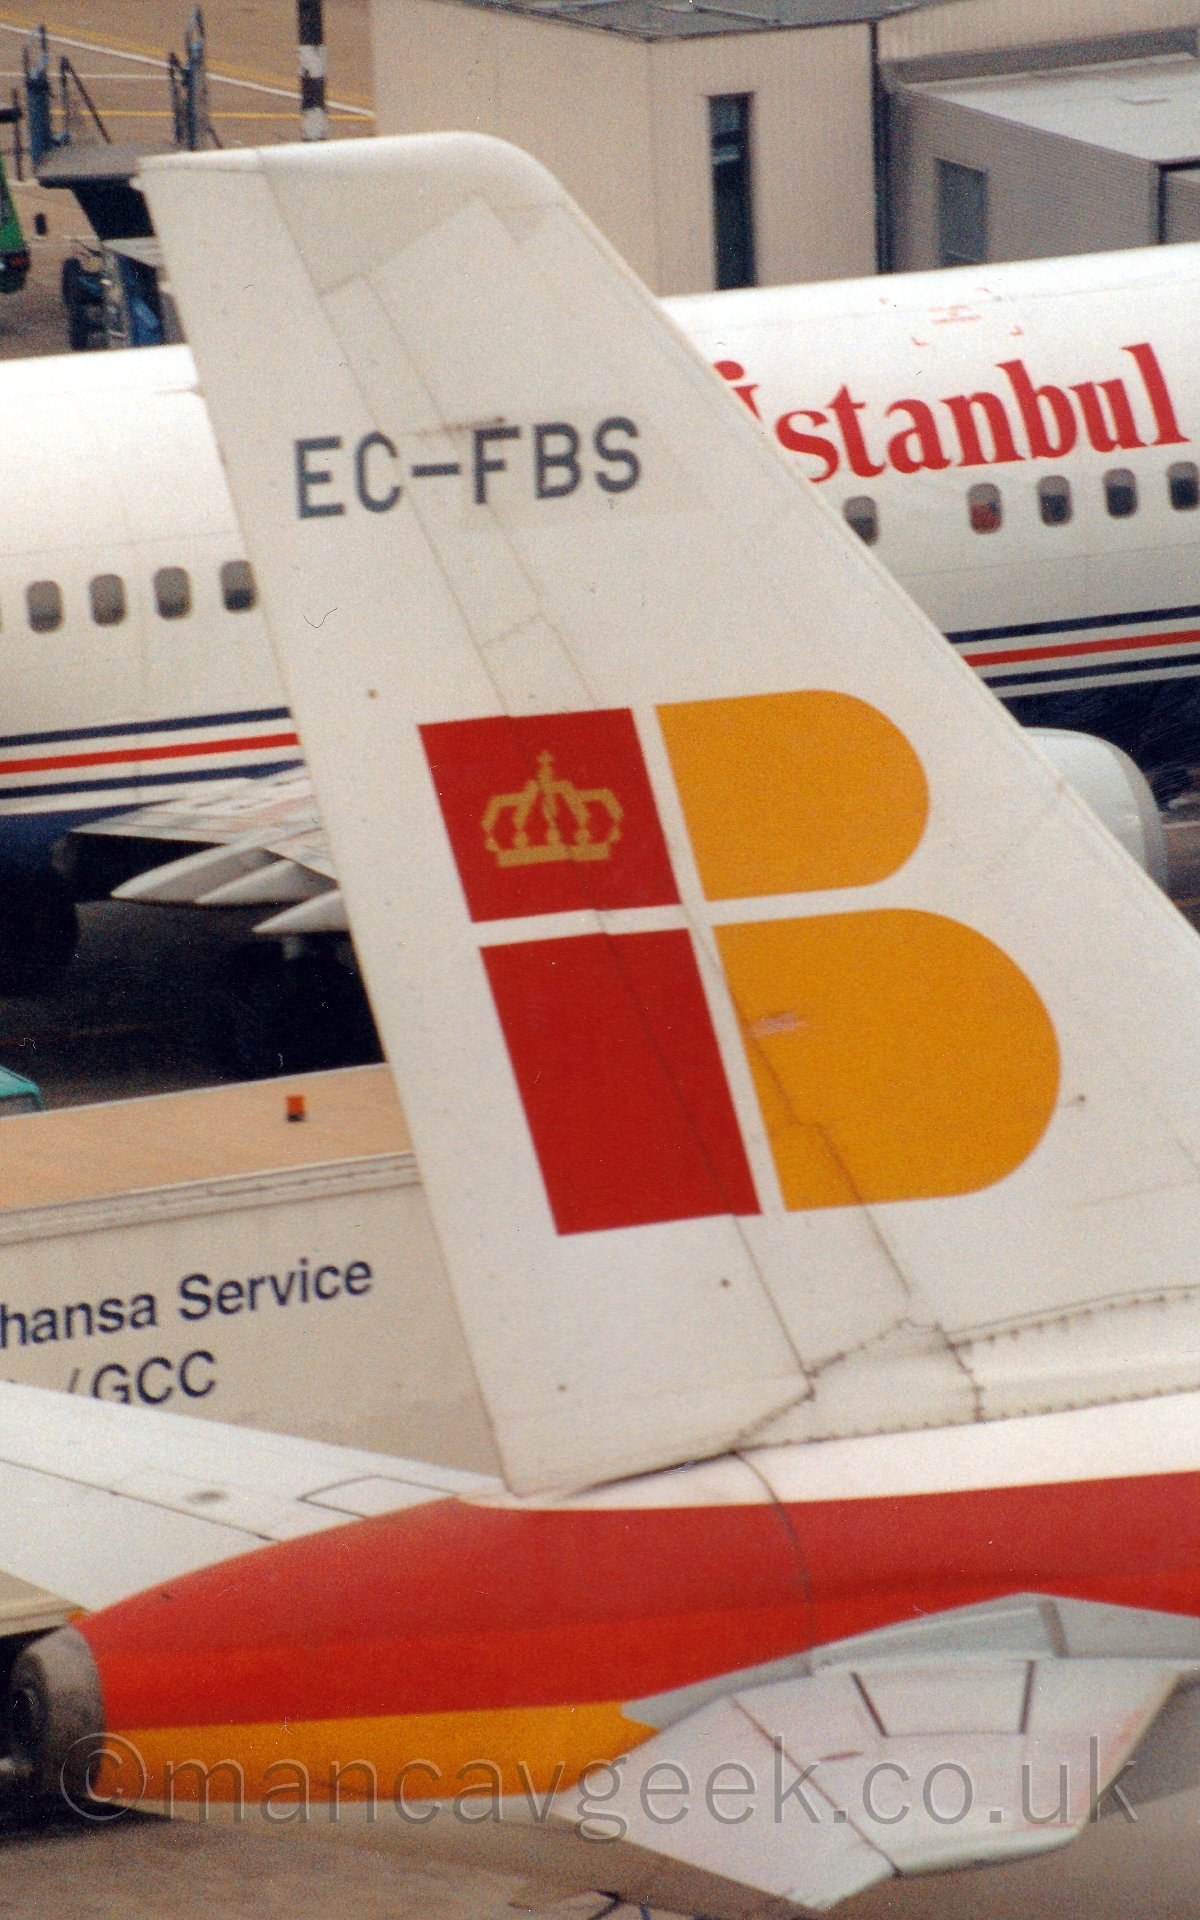 Closeup of the white tail of a jet airliner with the letter "i" and "B" in red and yellow, respectively, in the middle, with another jet airliner in the background.